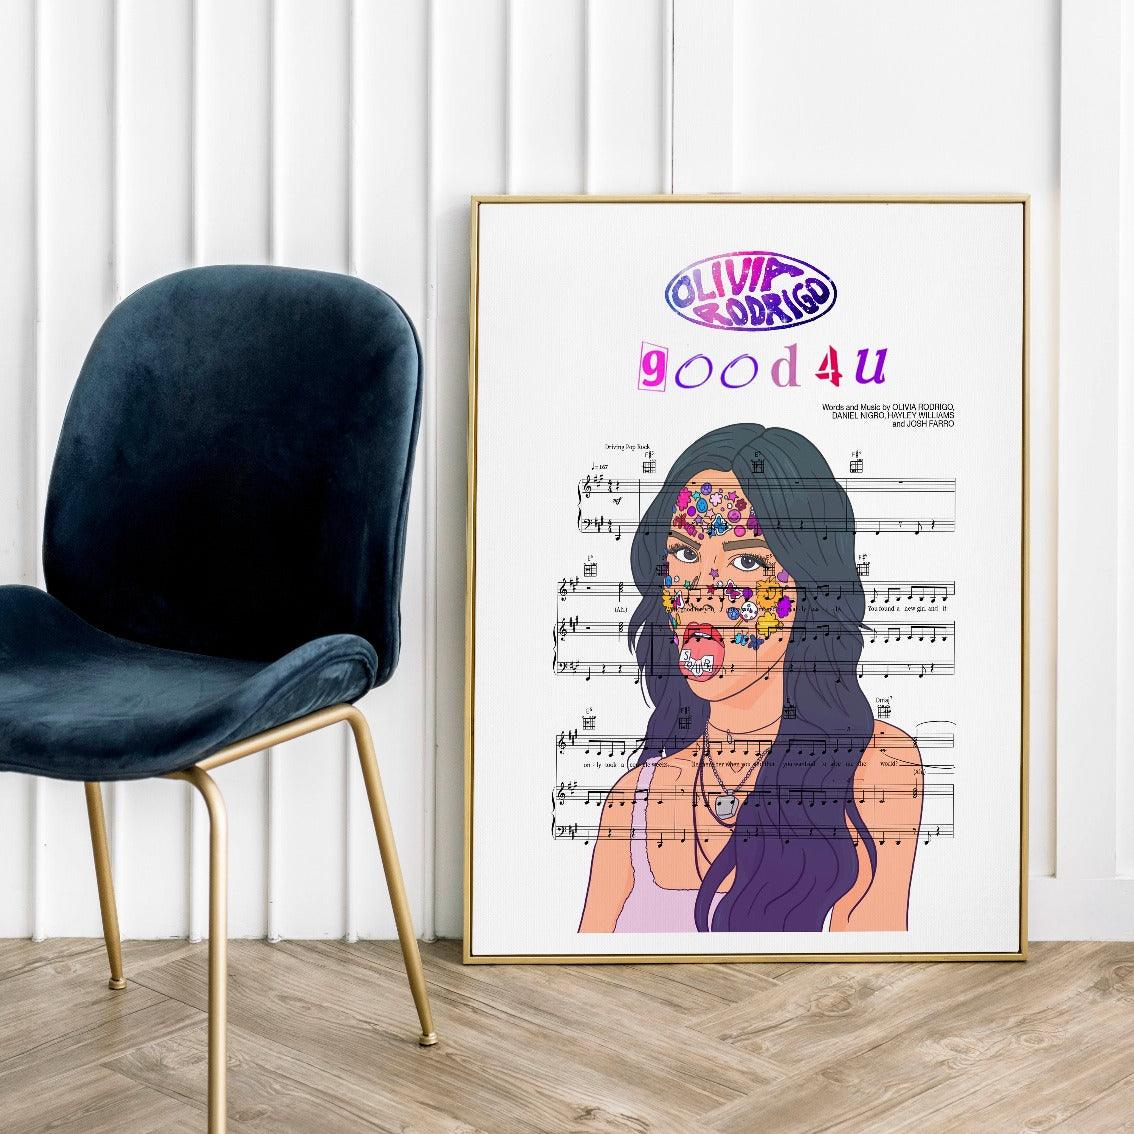 Olivia Rodrigo - good 4 u Song Music Print | Song Music Sheet Notes Print Everyone has a favorite song and now you can show the score as printed staff.